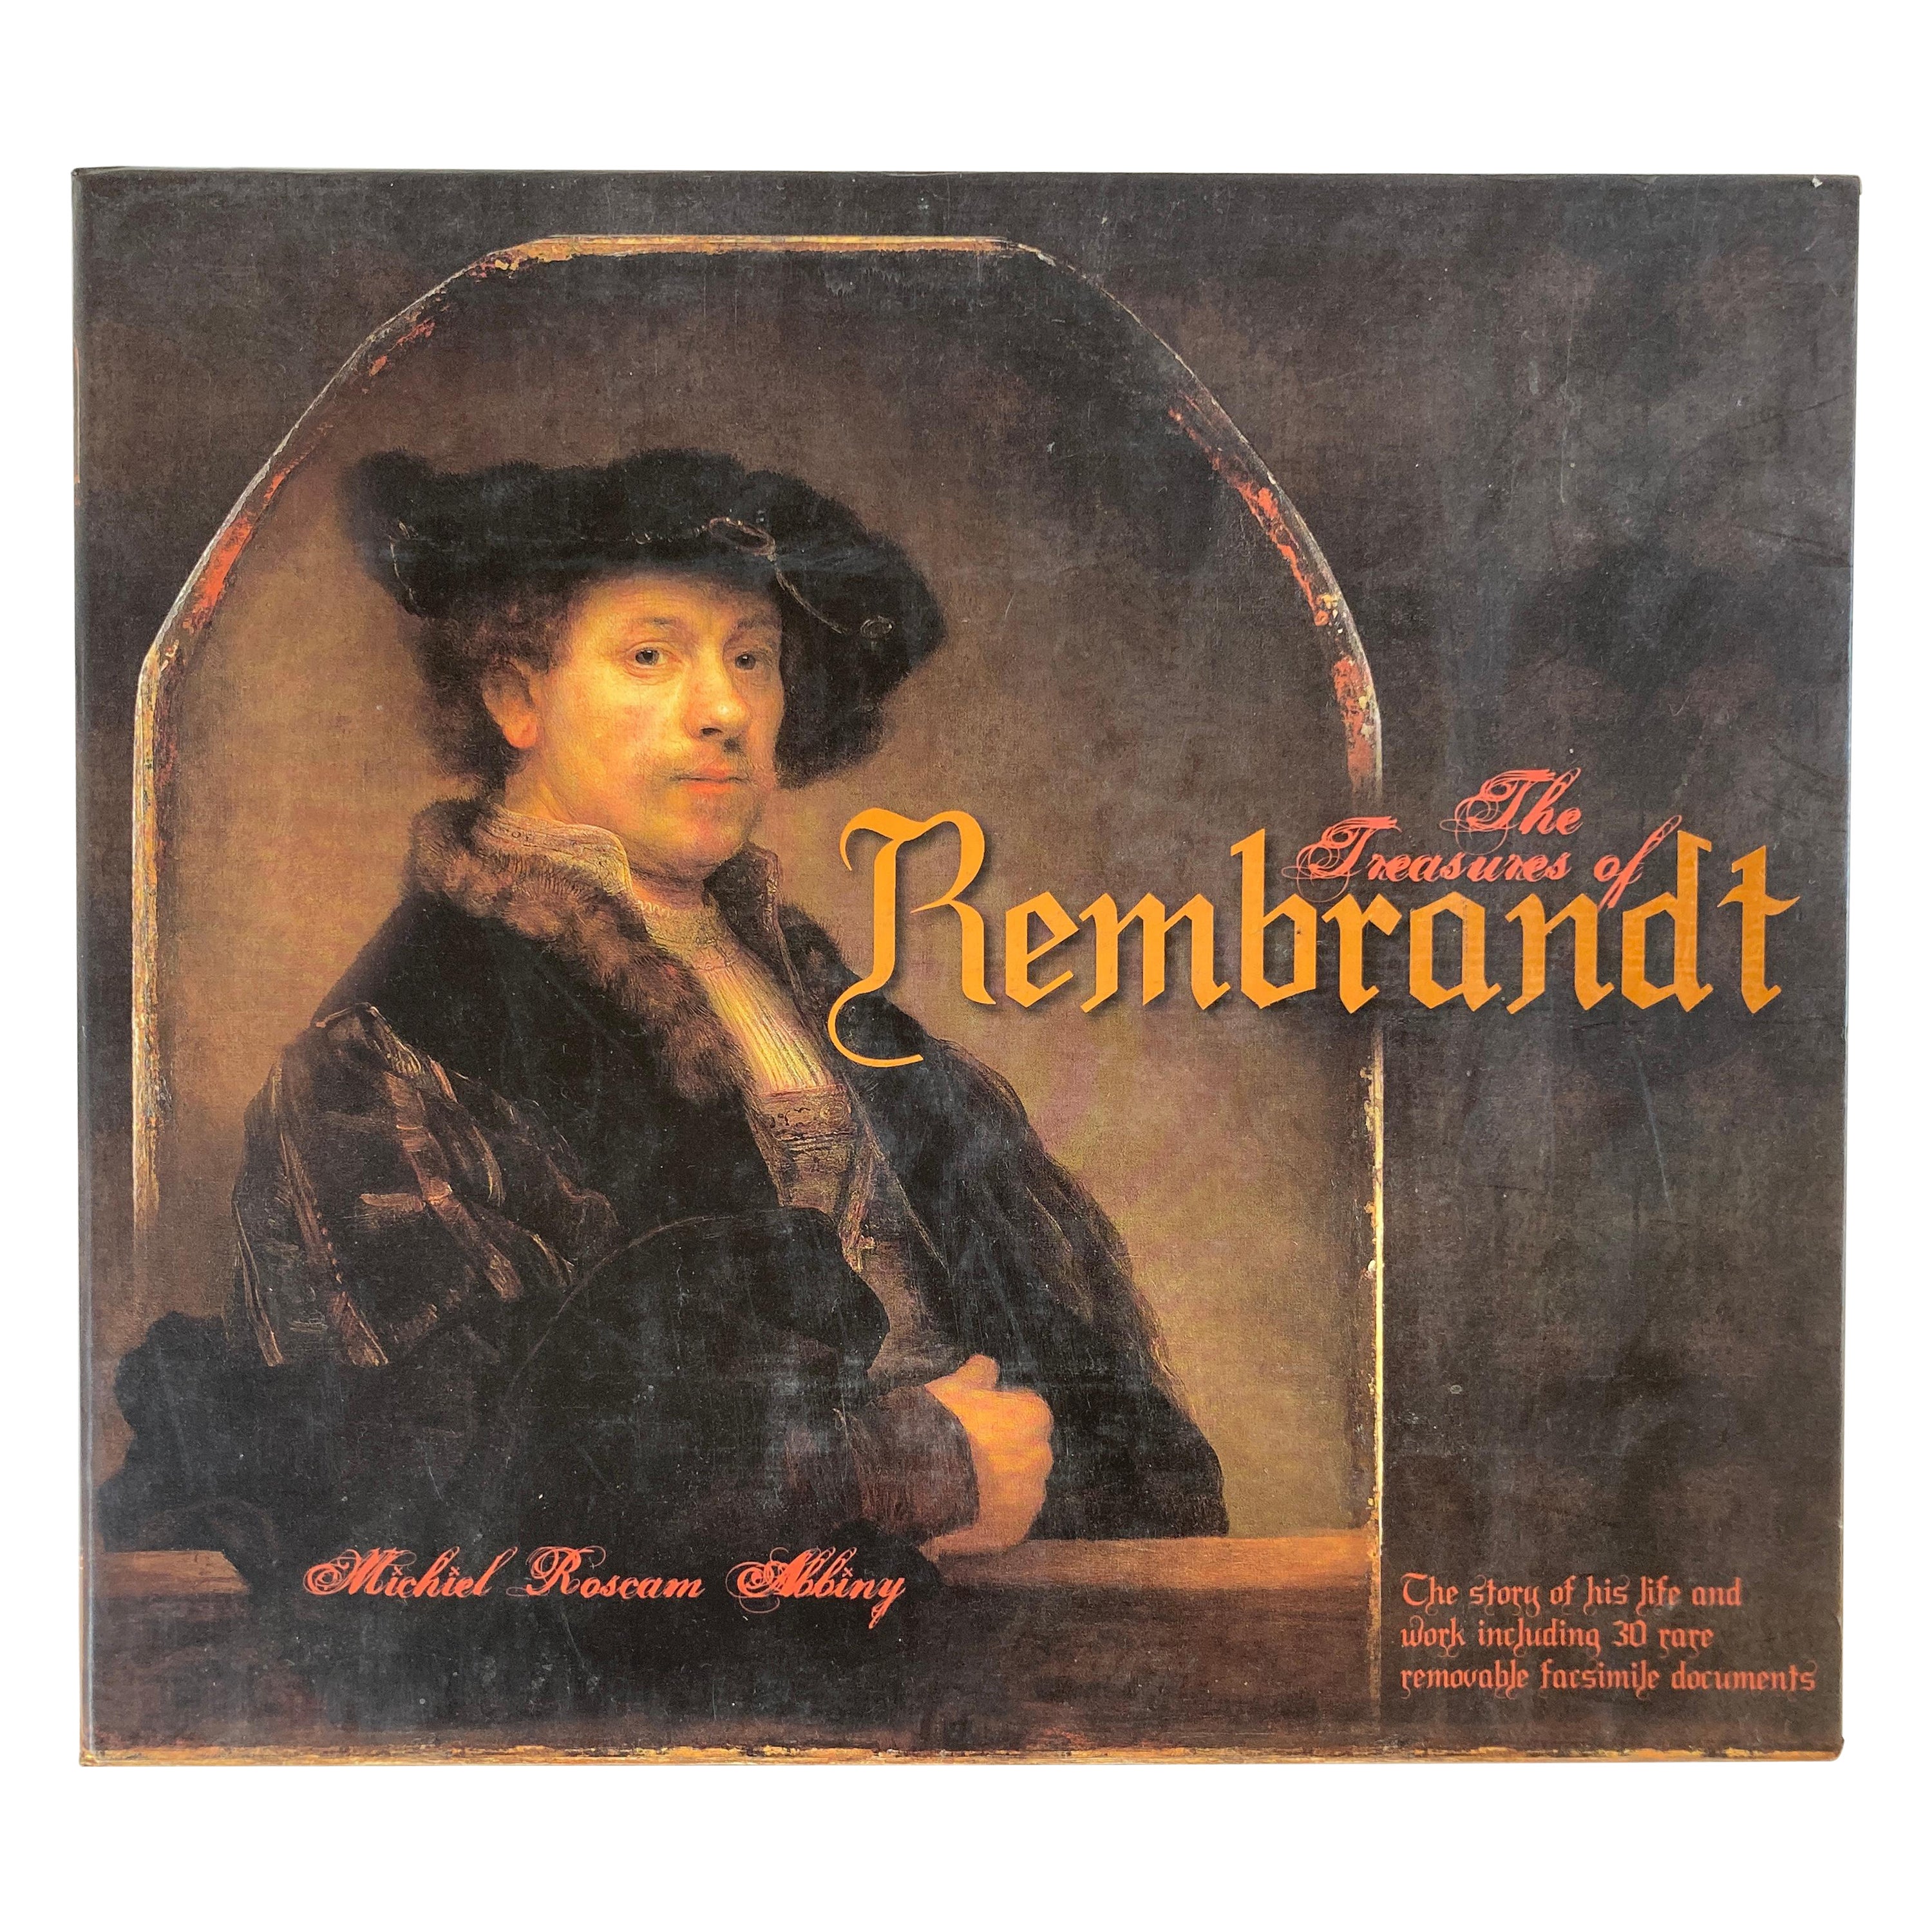 The Treasures of Rembrandt Book by Michiel Roscam Abbing Art Gallery Book For Sale